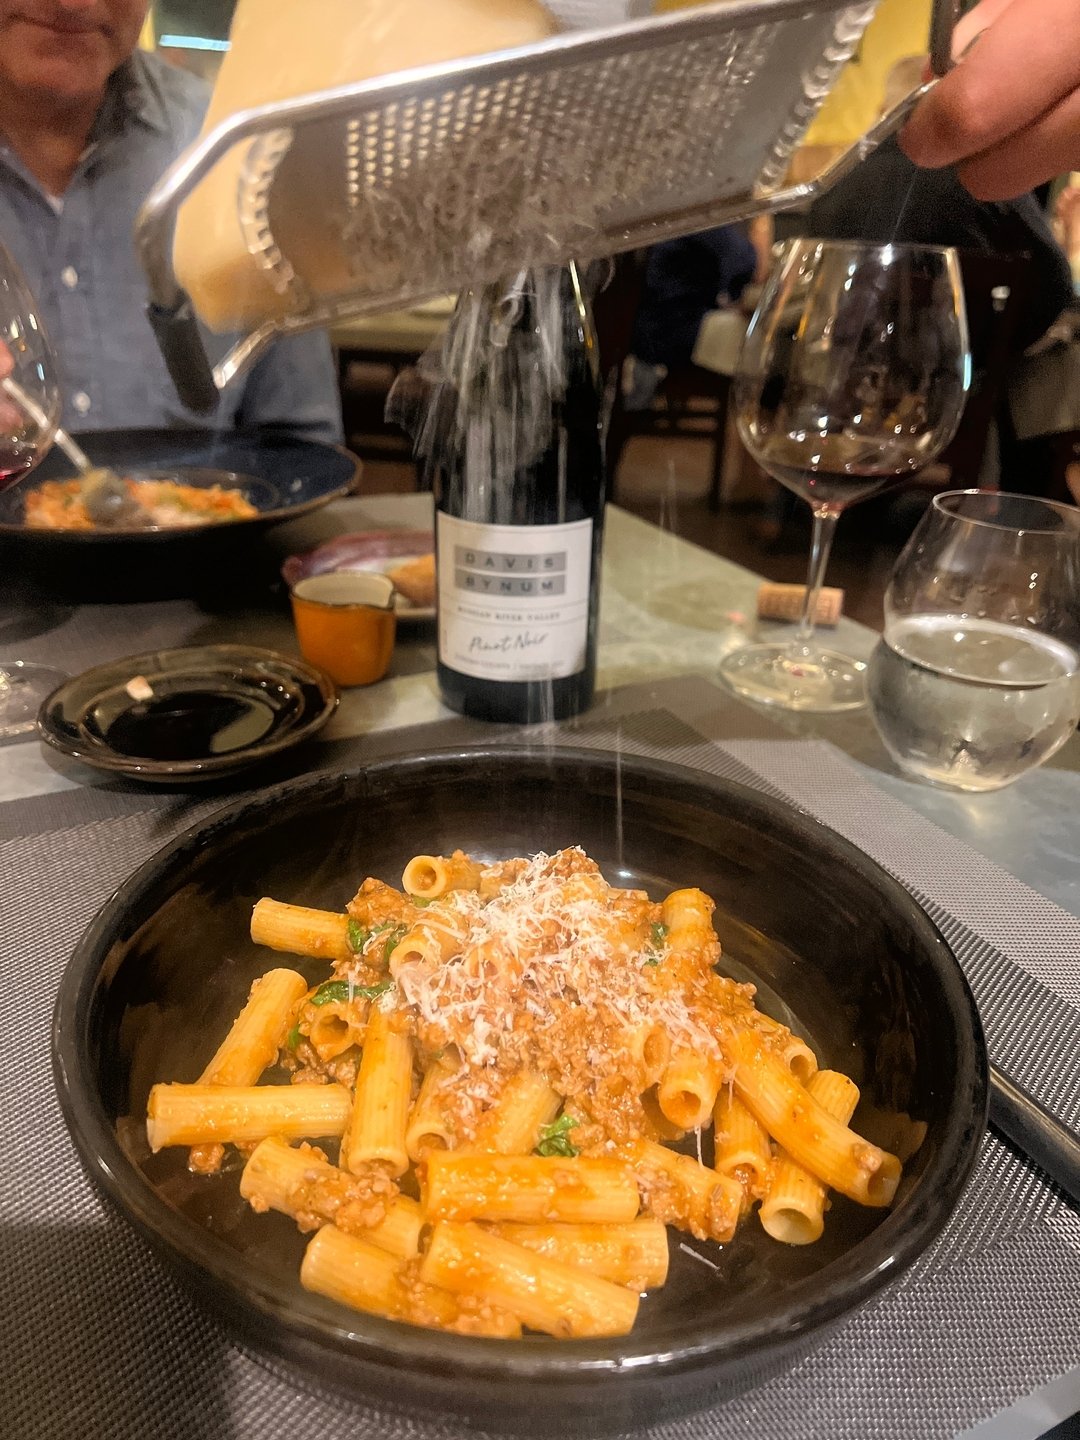 It's #FoodieFriday, and I'm thrilled to spotlight a local favorite that epitomizes the charm of Healdsburg living - Baci Cafe &amp; Wine Bar 🍴🍷. 

Nestled in the heart of our town, Baci is a culinary treasure co-owned by the dynamic duo, Lisbeth fr